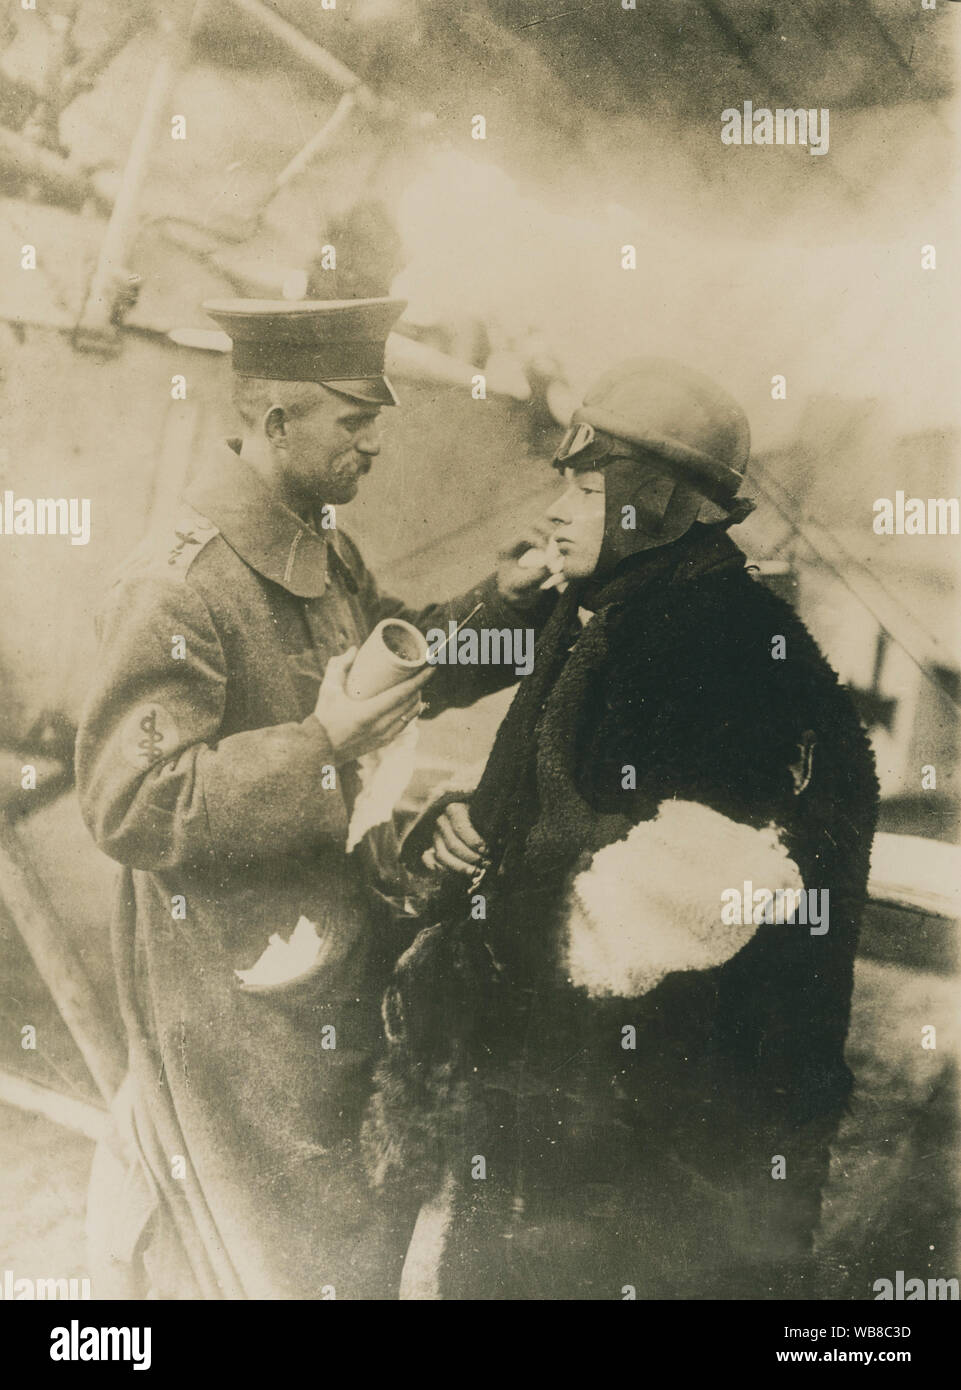 First World War 1914-1918. A pilot is being prepared for a flight mission. He is dressed in a warm coat. A man is putting on an ointment on the pilot's face that is somewhat protective against the cold wind when he sits in the open cockpit of the aircraft. Stock Photo